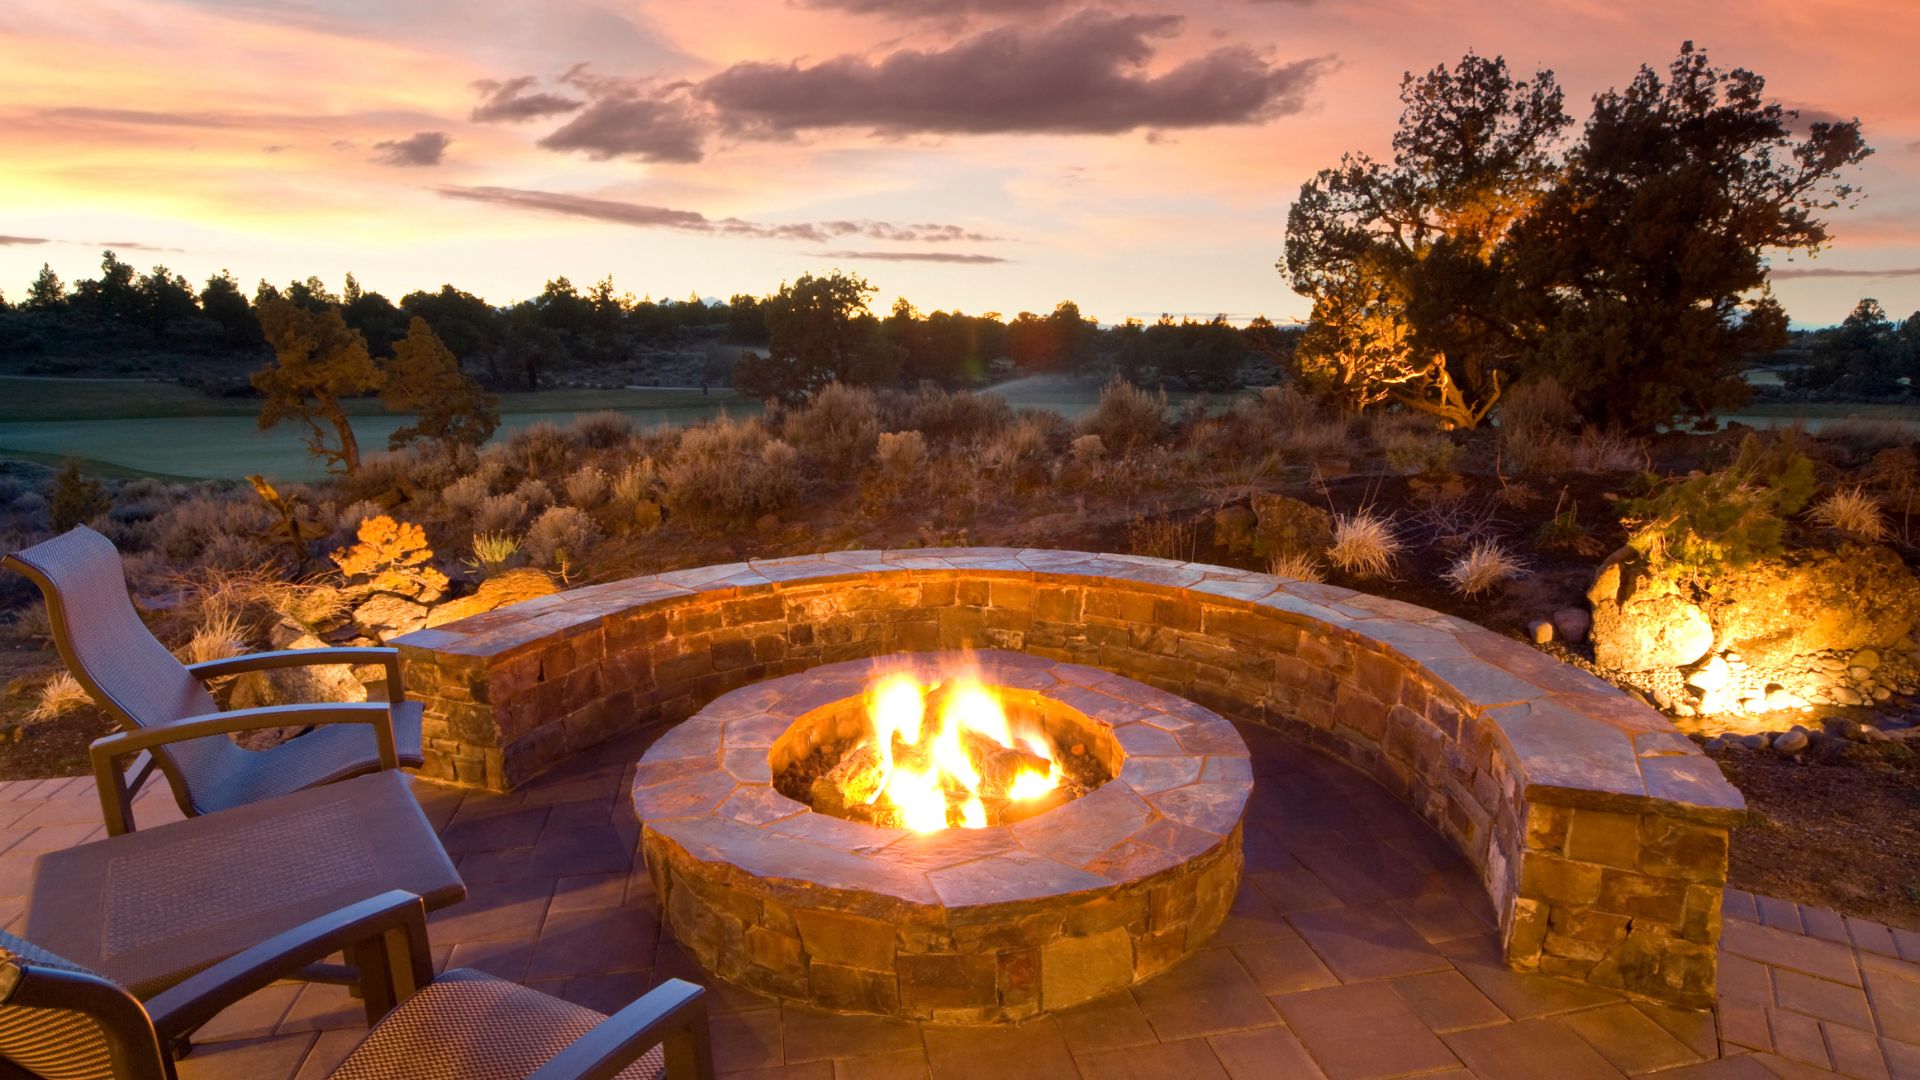 Why Should You Invest in a Fire Pit for Your Houston Home?